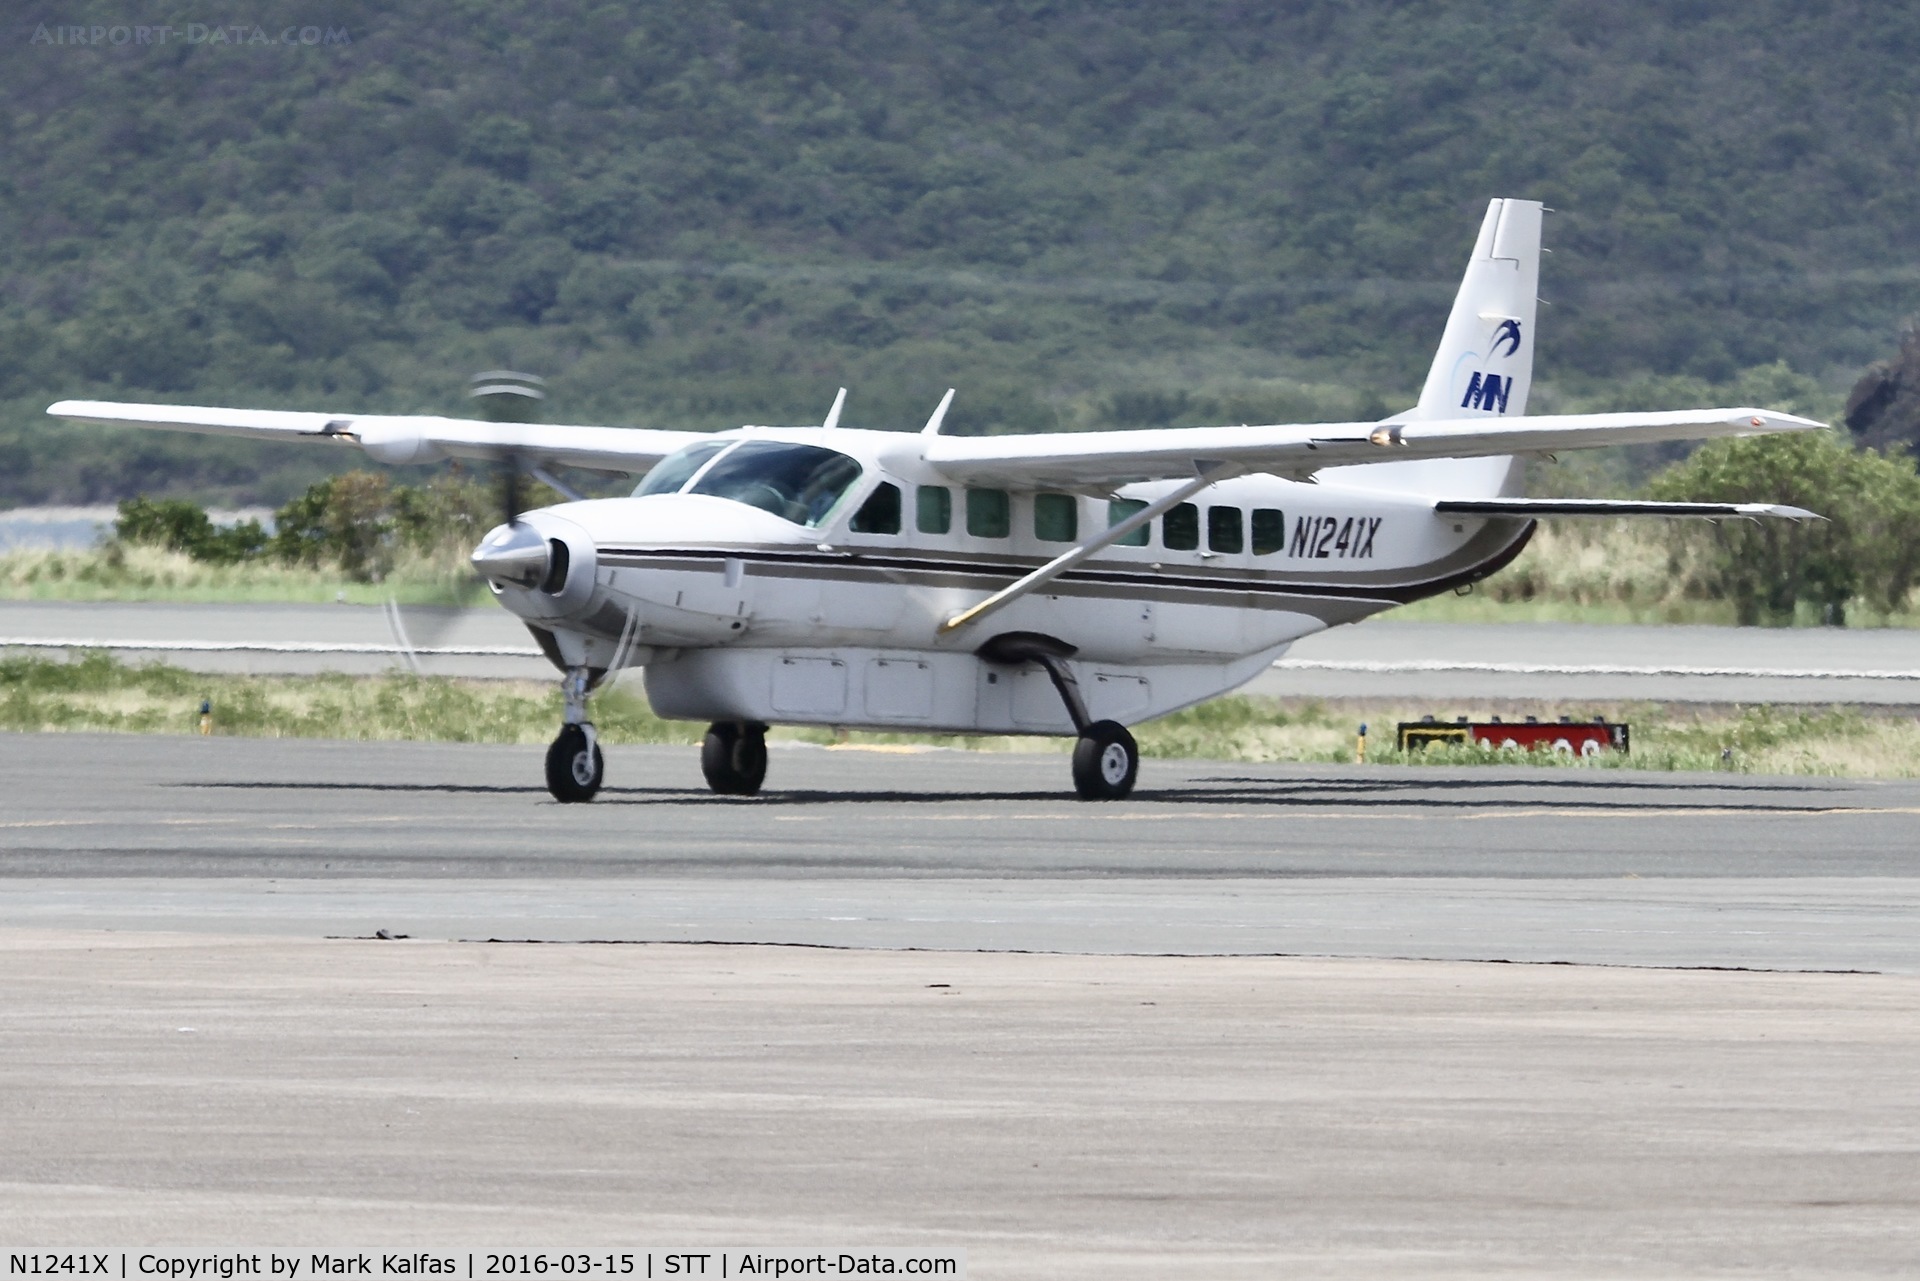 N1241X, 1998 Cessna 208B C/N 208B0657, MN Aviation, taxiing at STT for departure to SJU.